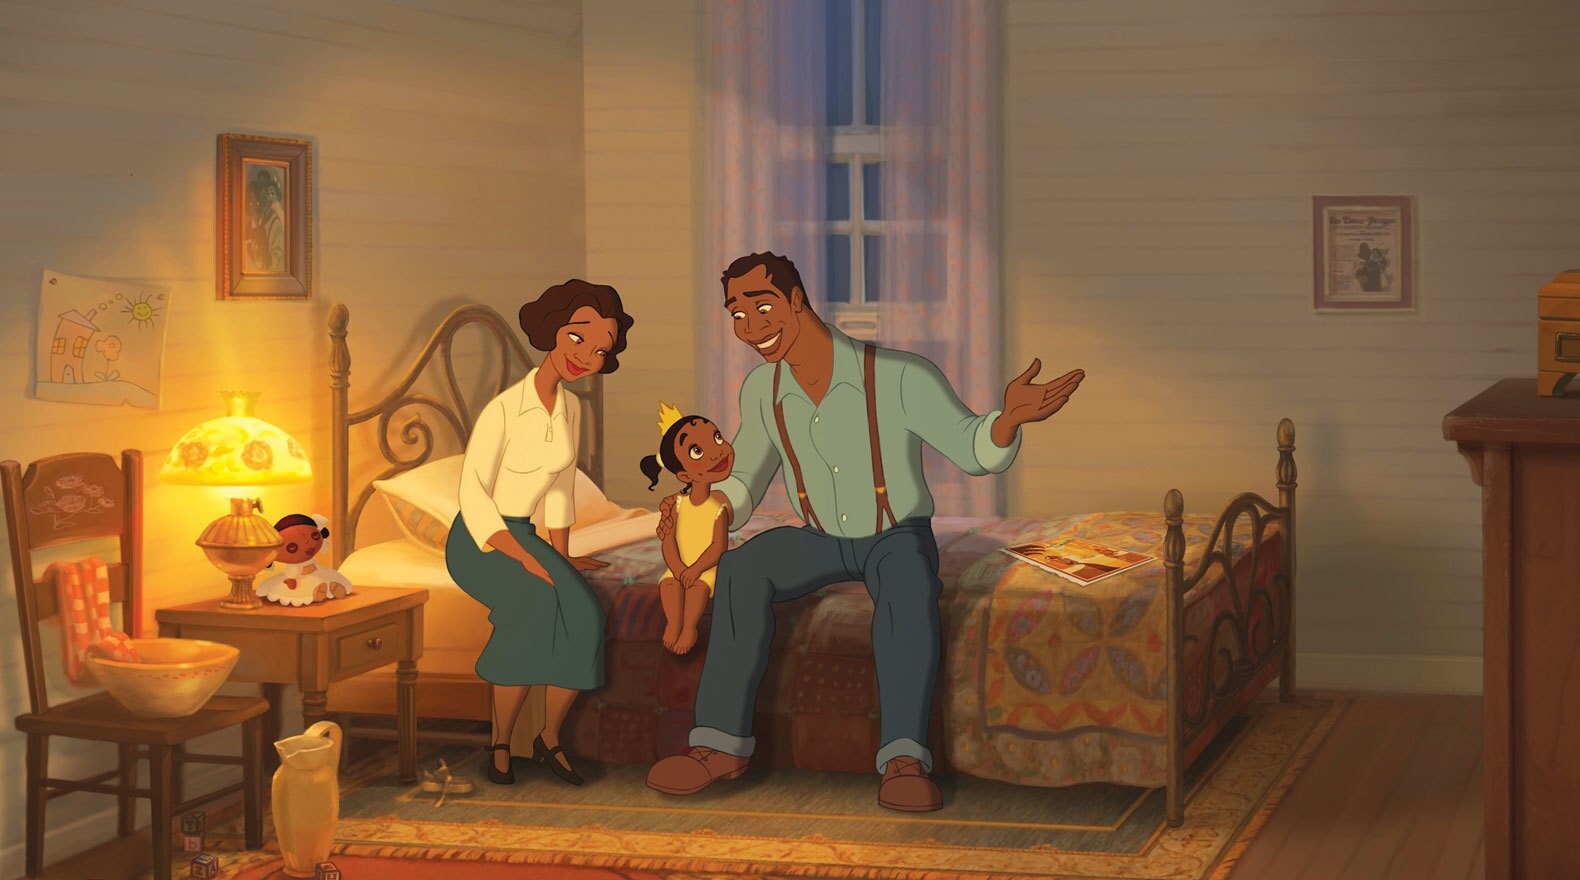 Tiana sits with her mother Eudora and James her father.